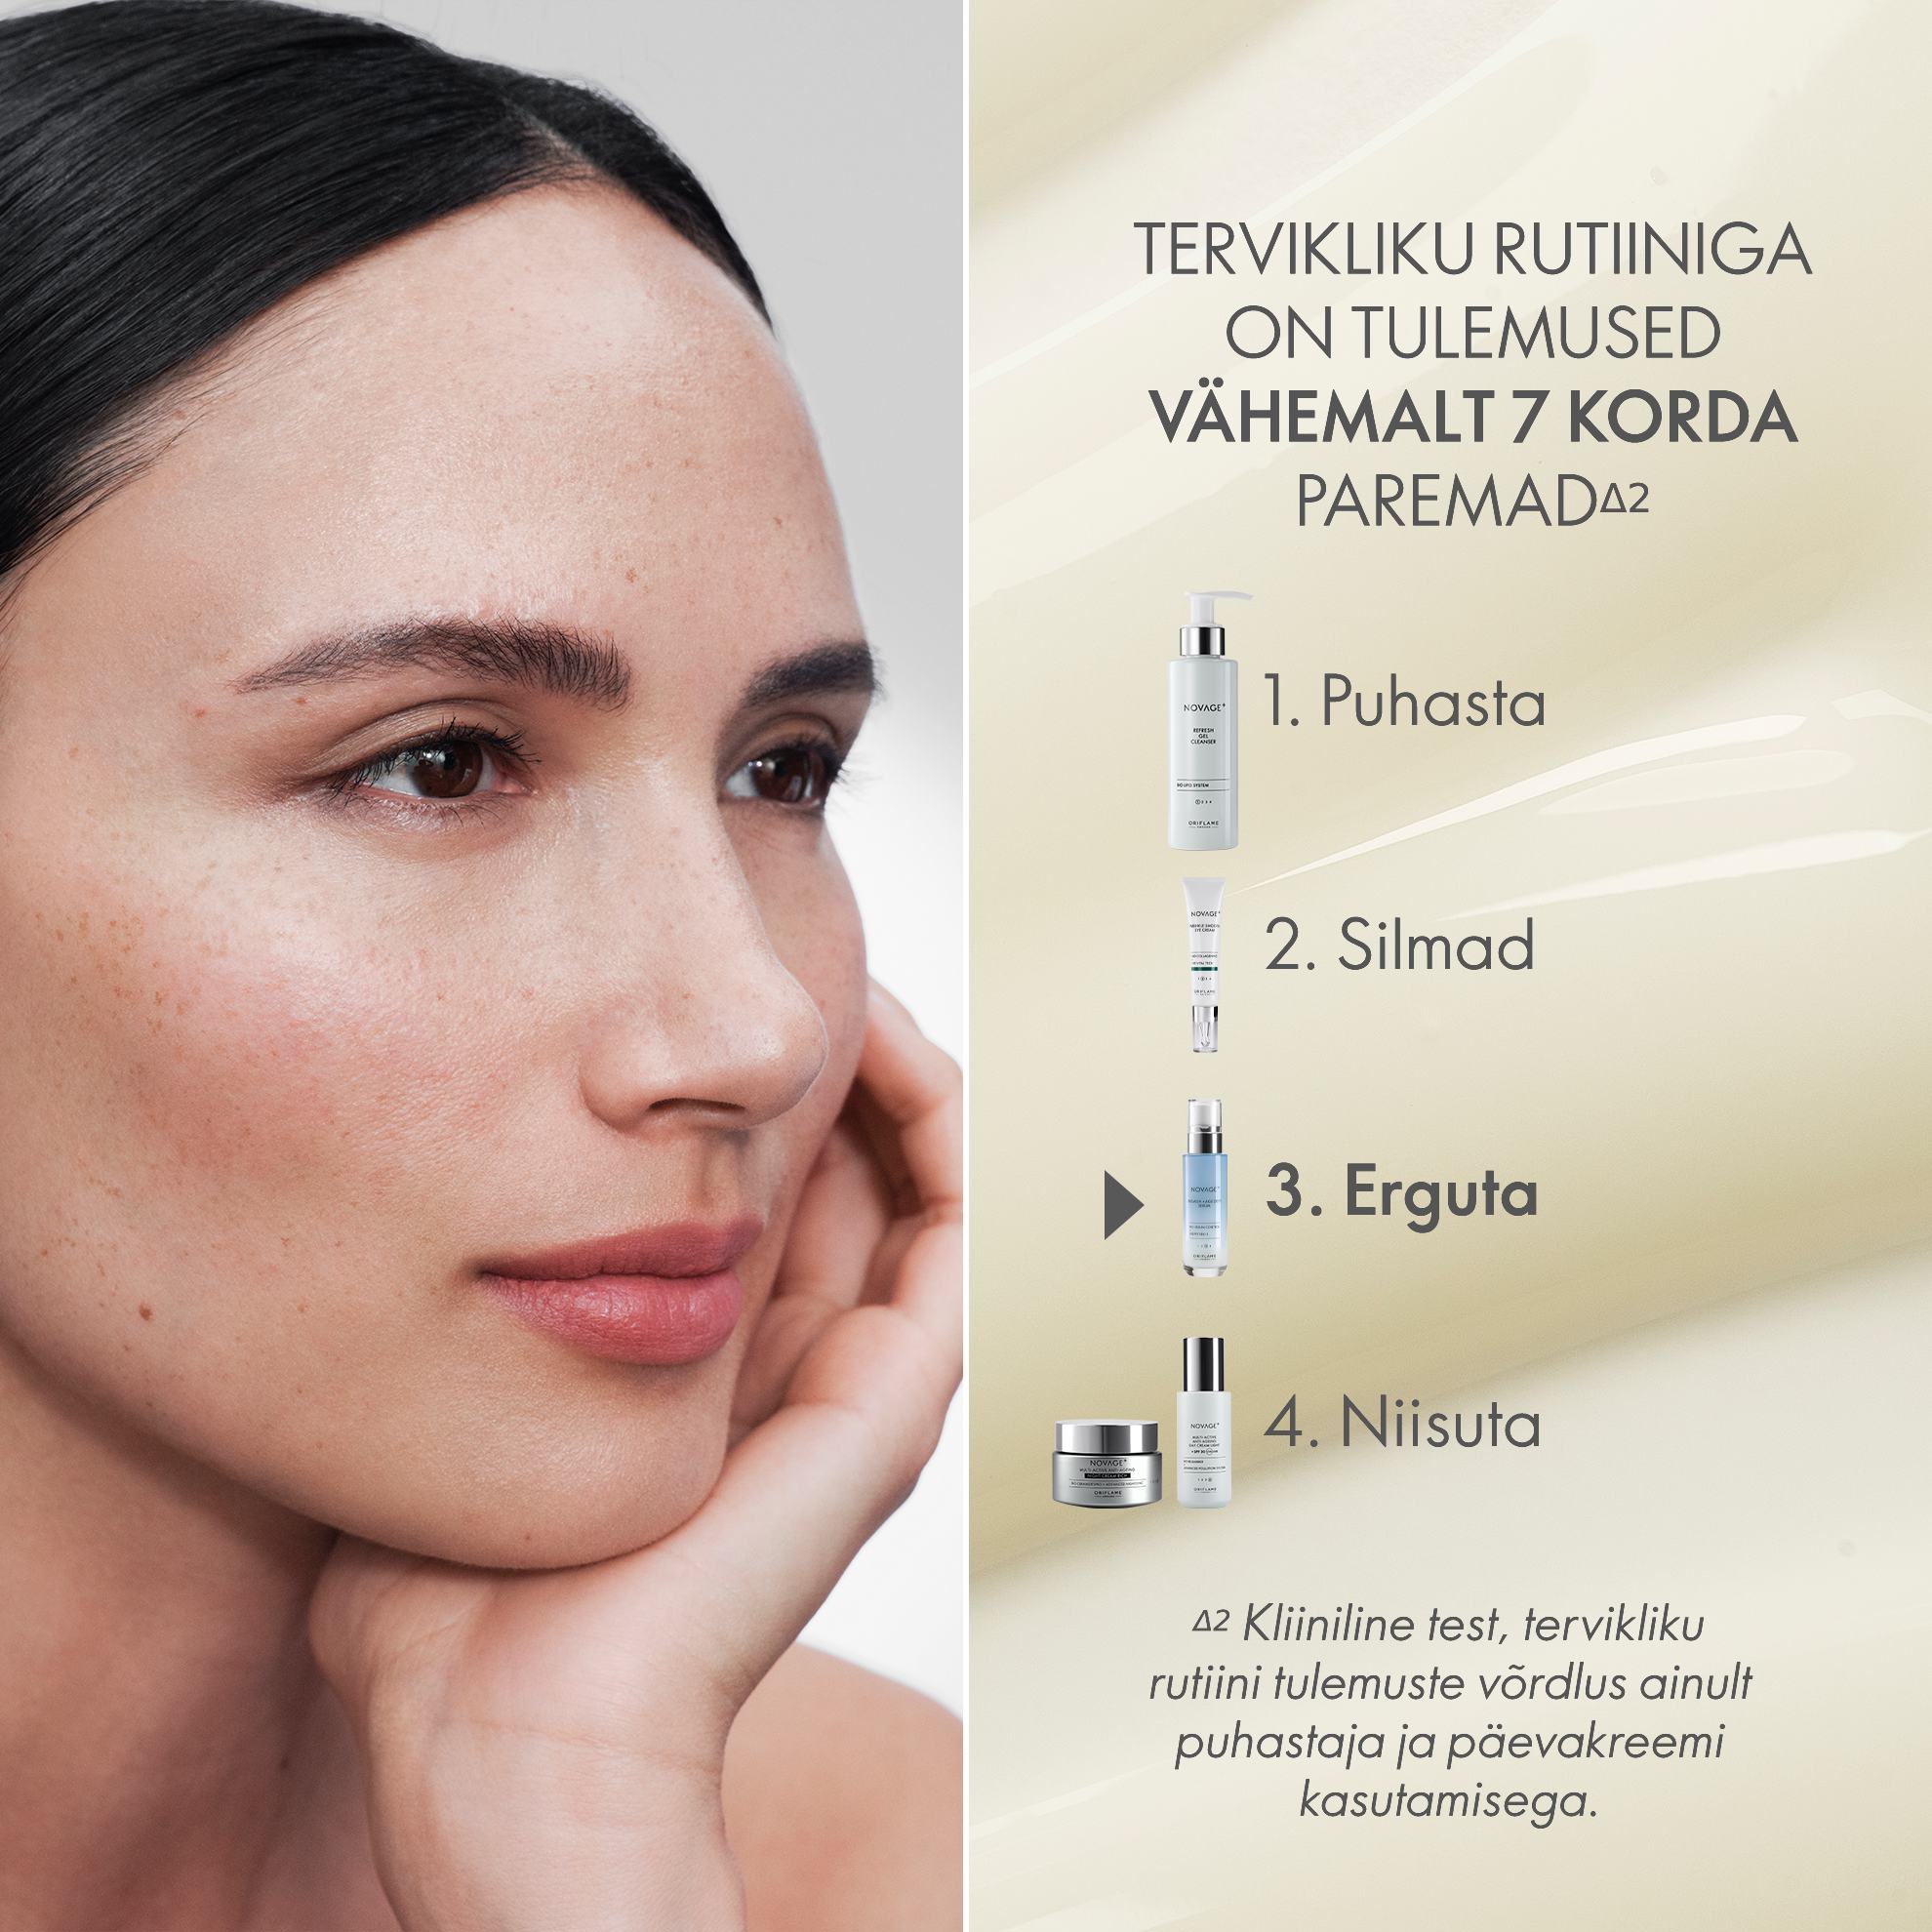 https://media-cdn.oriflame.com/productImage?externalMediaId=product-management-media%2fProducts%2f41039%2fEE%2f41039_4.png&id=17585992&version=1